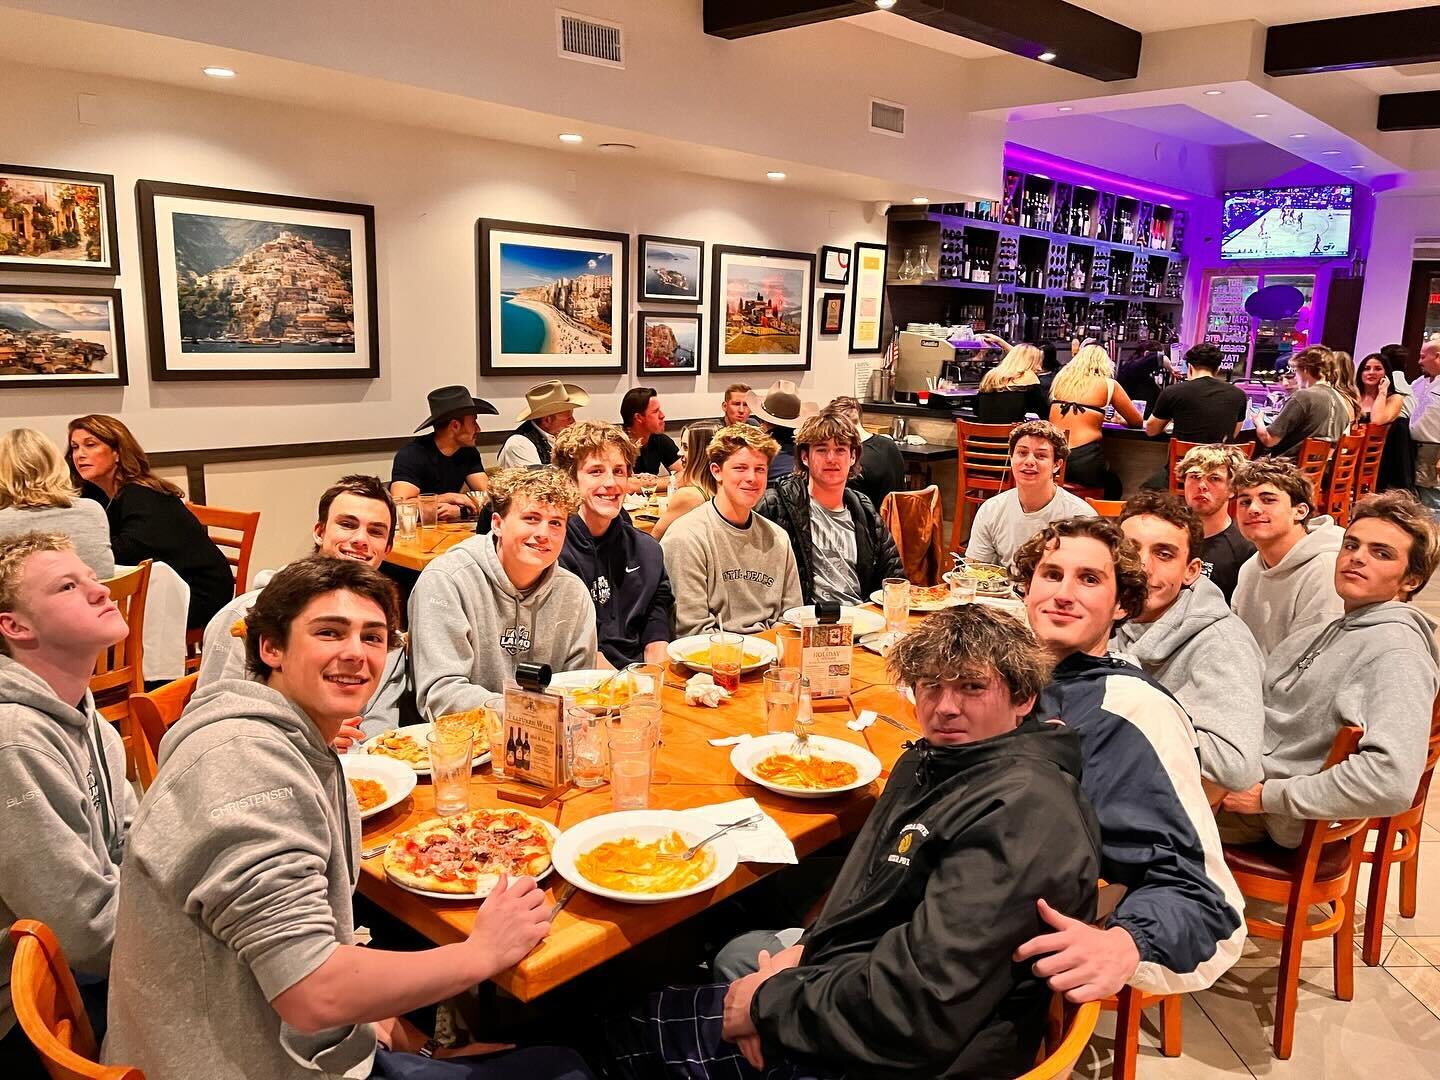 Great first day at Kap7 for the 18U boys team. Enjoying a team dinner and getting ready for a big day tomorrow. GO LAMO!